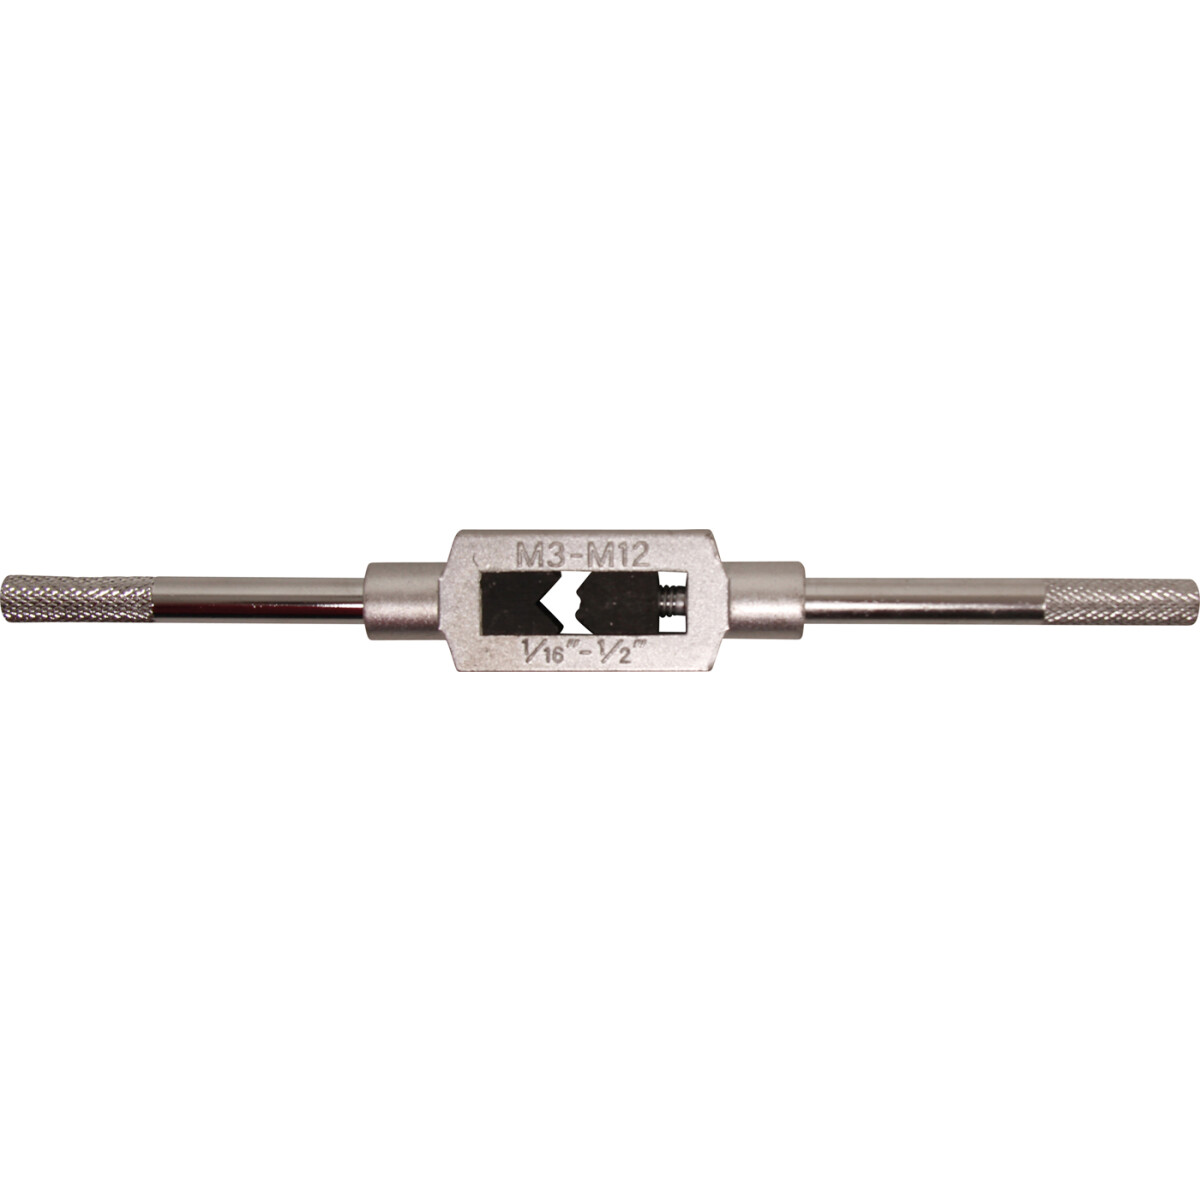 BGS Tap Wrench | M3 - M12 (BGS 1900-1)